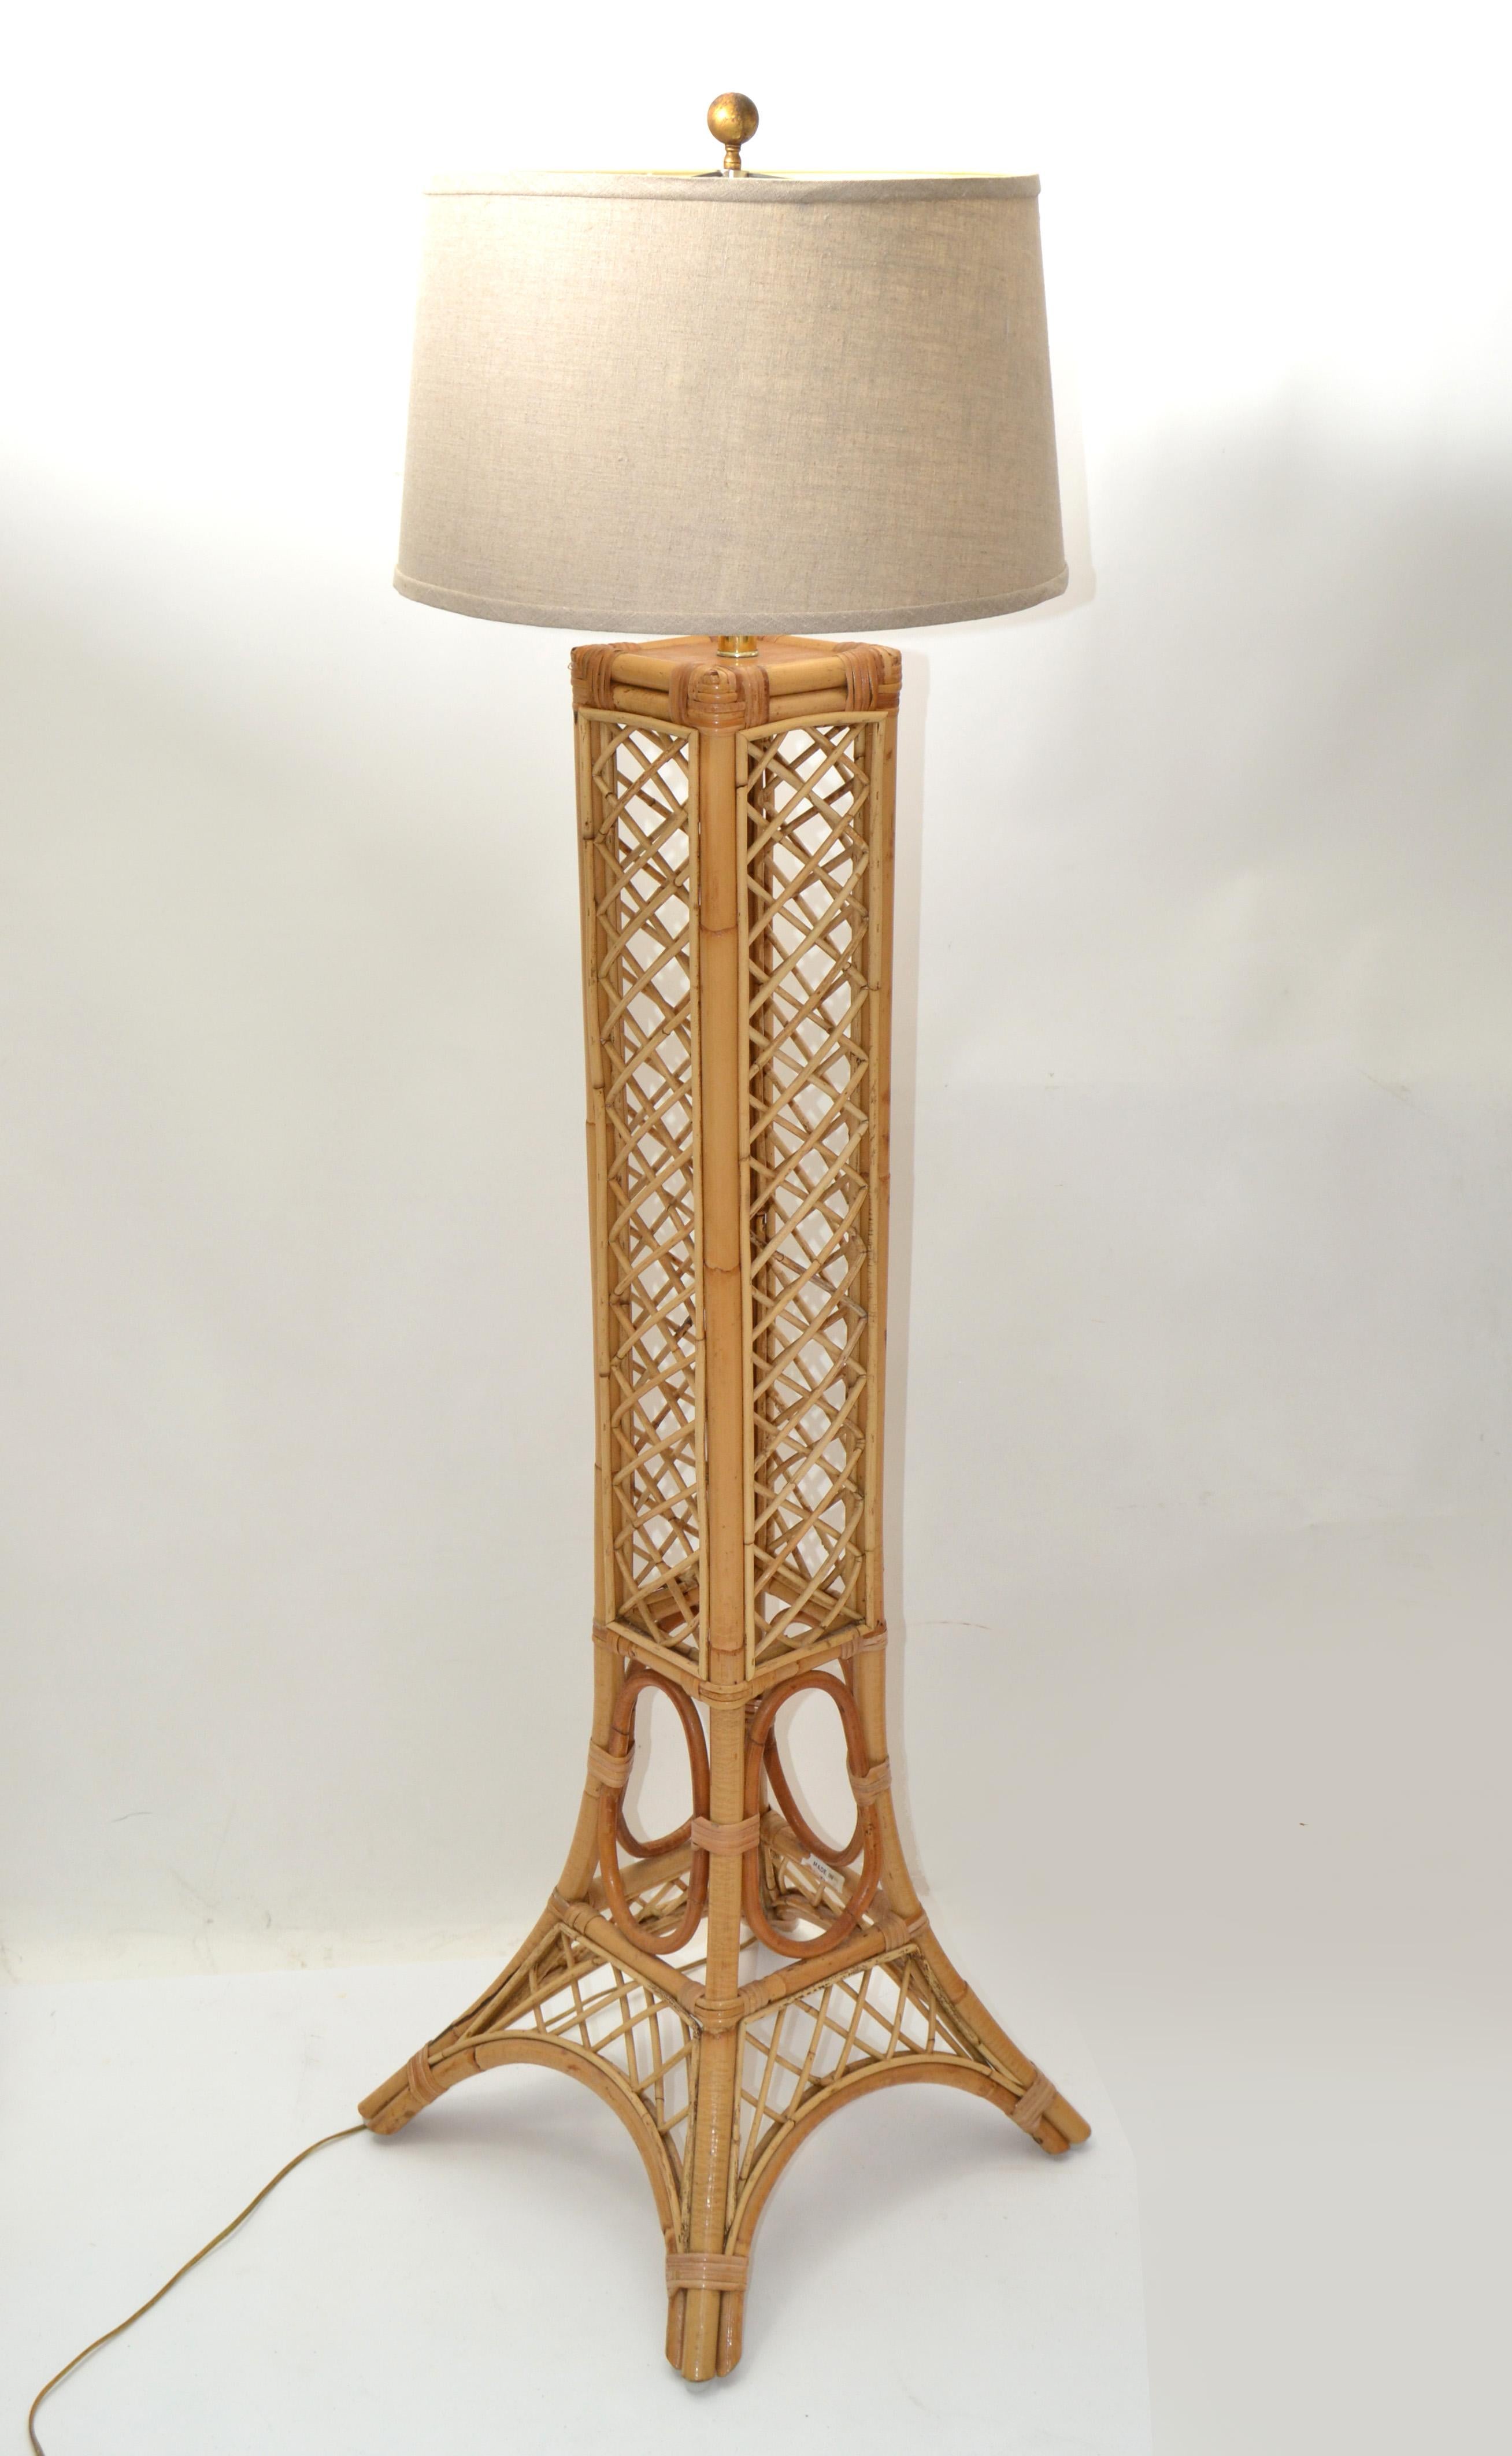 Handcrafted tall Mid-Century Modern Eiffel Tower Paris pencil reed, cane & bamboo floor lamp with Drum Shade.
It is wired for the U.S. and uses a regular or LED bulb. 
Bohemian chic design sculpture stunning addition for your sunroom.
Drum shade